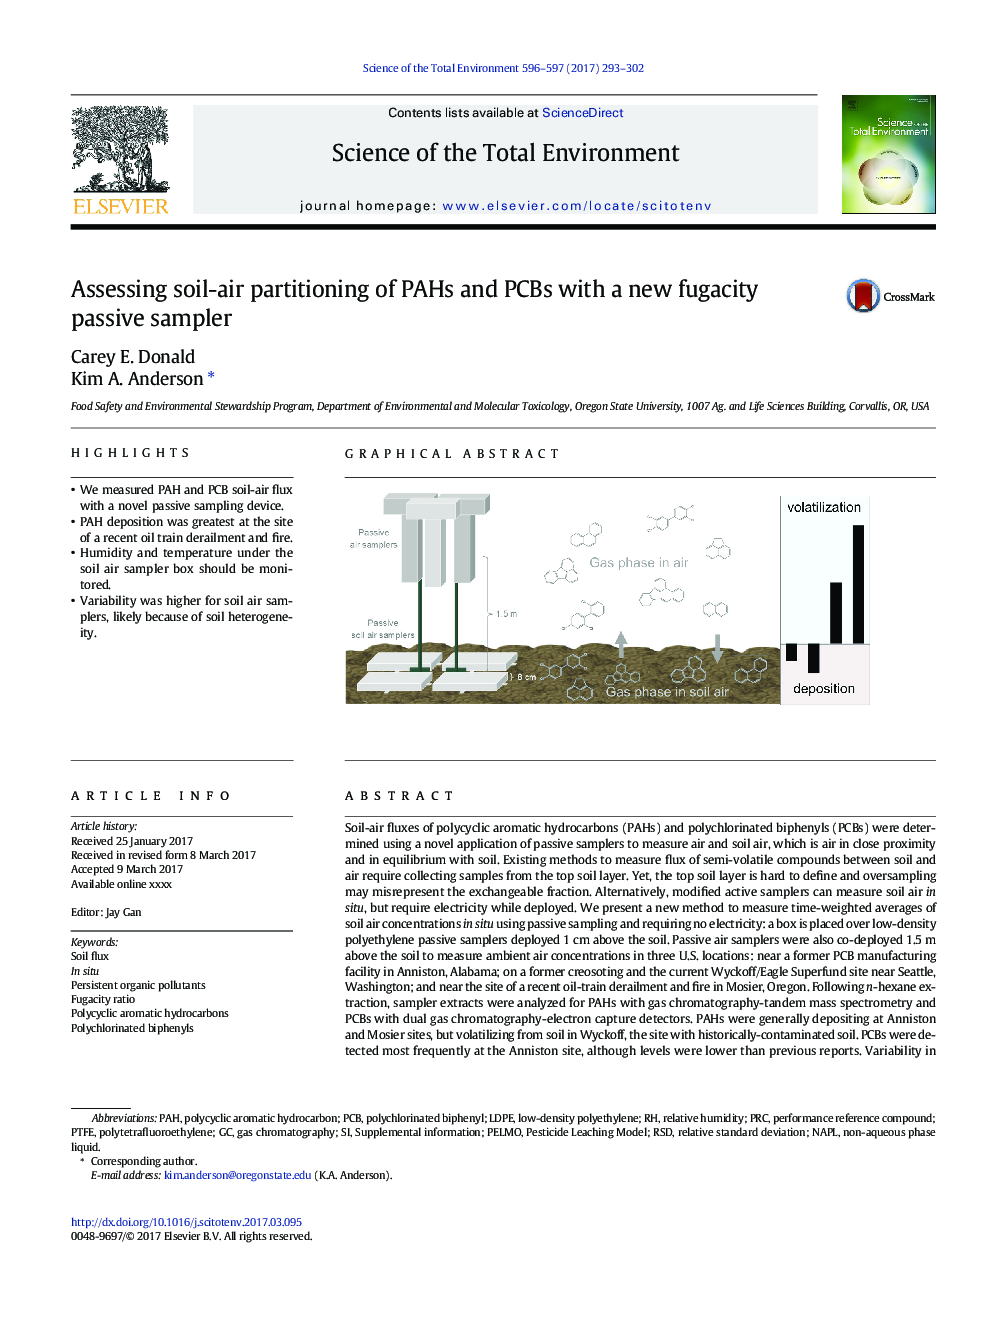 Assessing soil-air partitioning of PAHs and PCBs with a new fugacity passive sampler